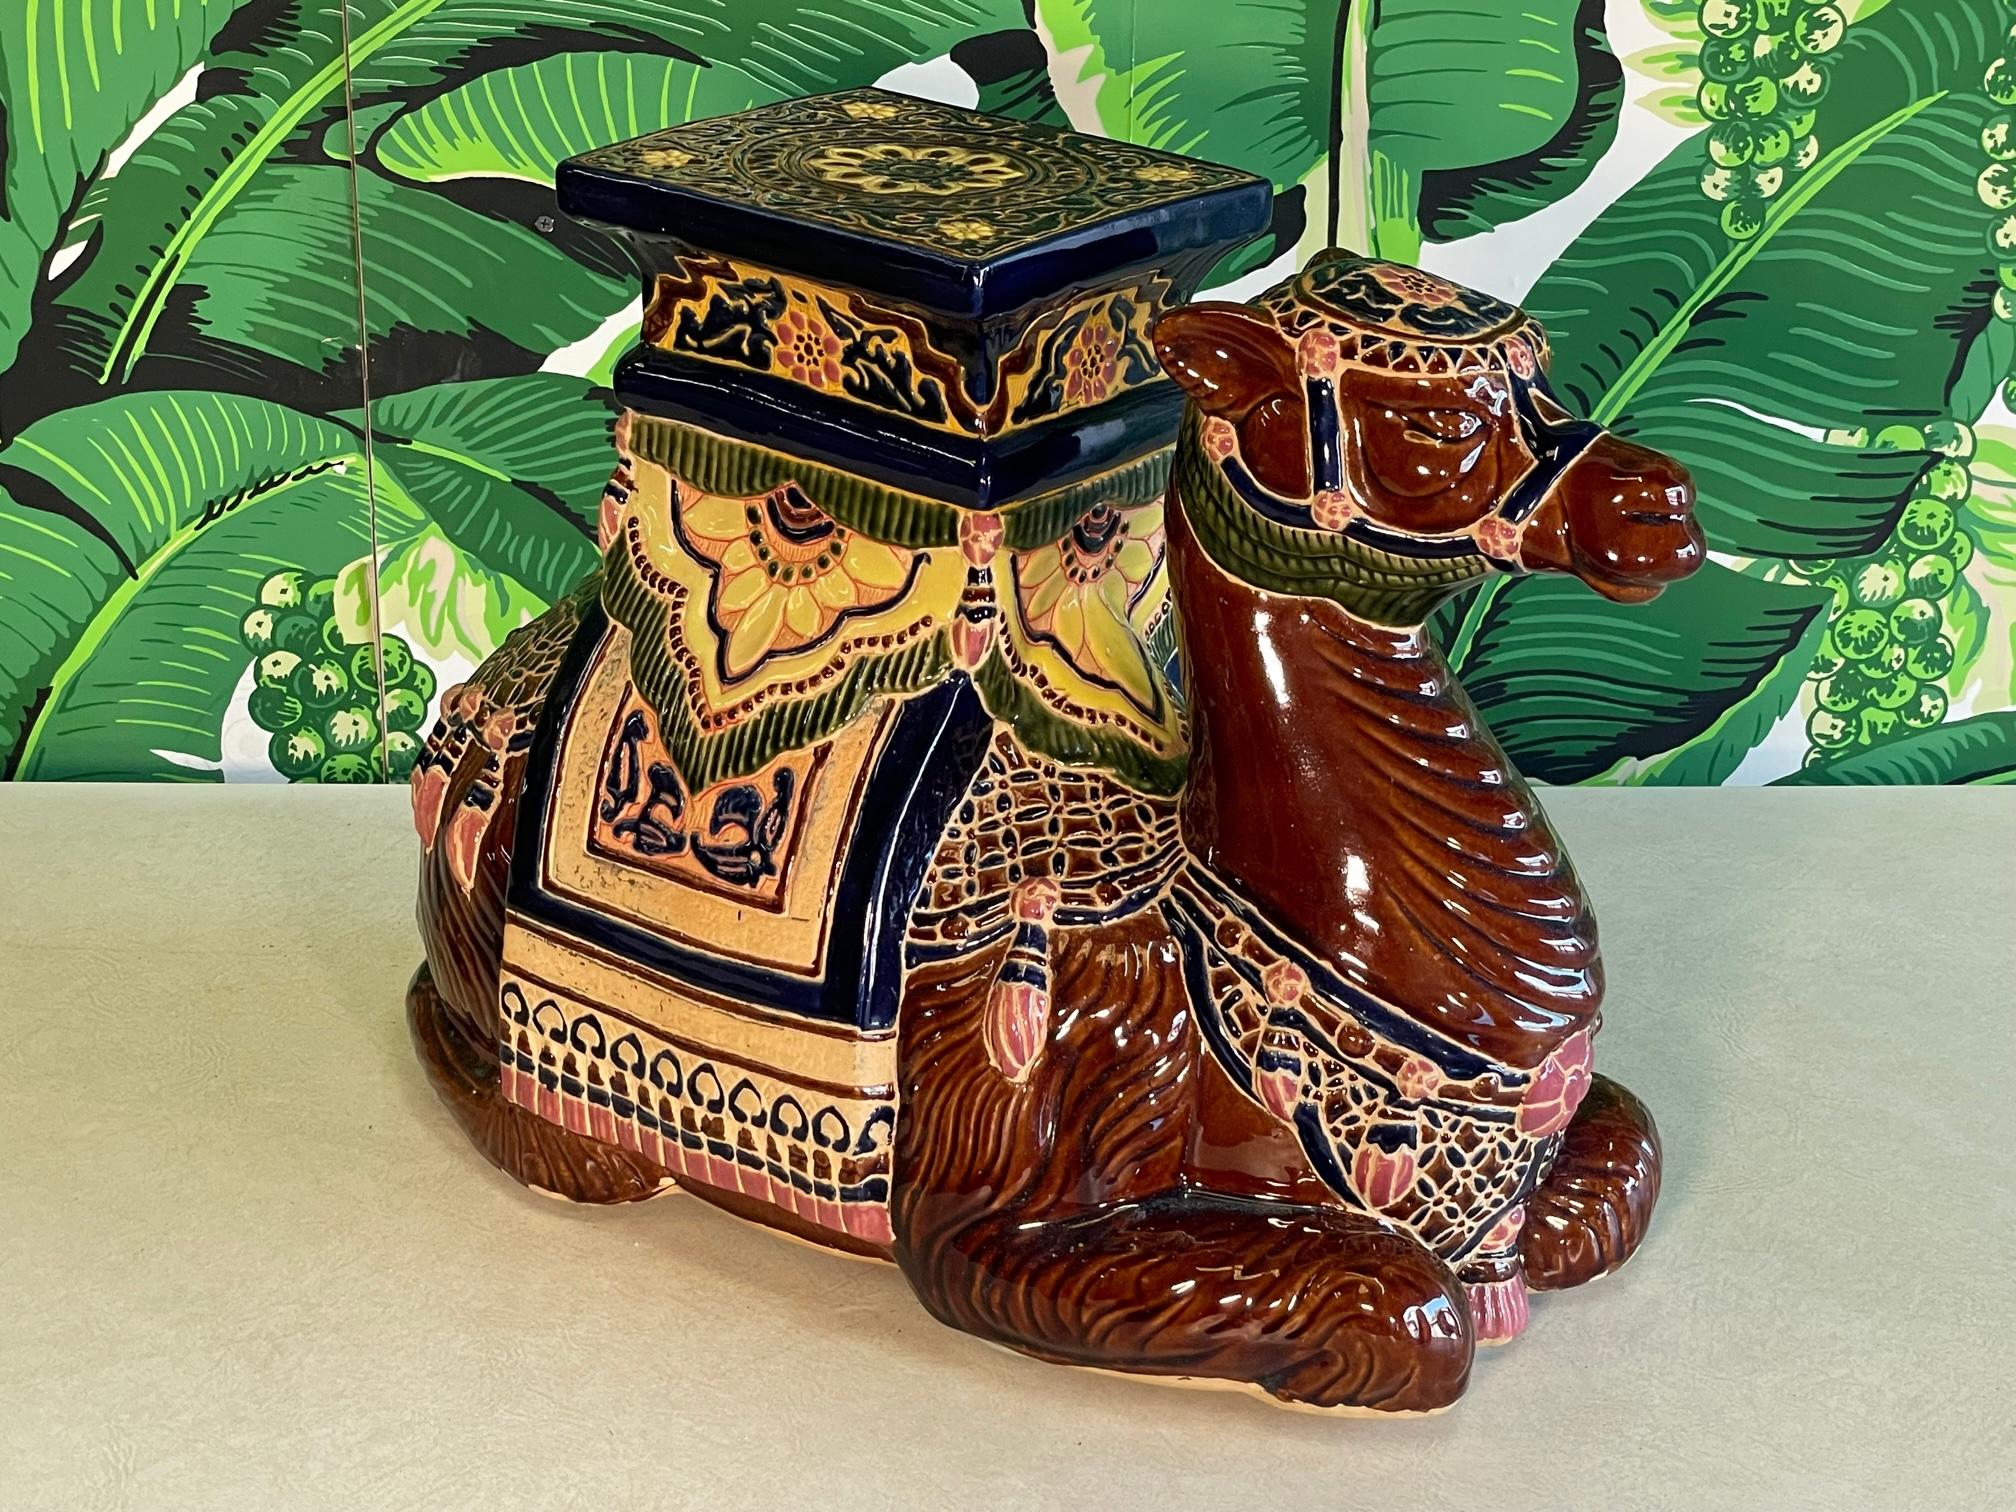 Large handcrafted glazed terracotta camel garden stool, flower pot seat or side table is sure to be a conversation piece. Good condition with imperfections consistent with age, see photos for condition details. 
For a shipping quote to your exact